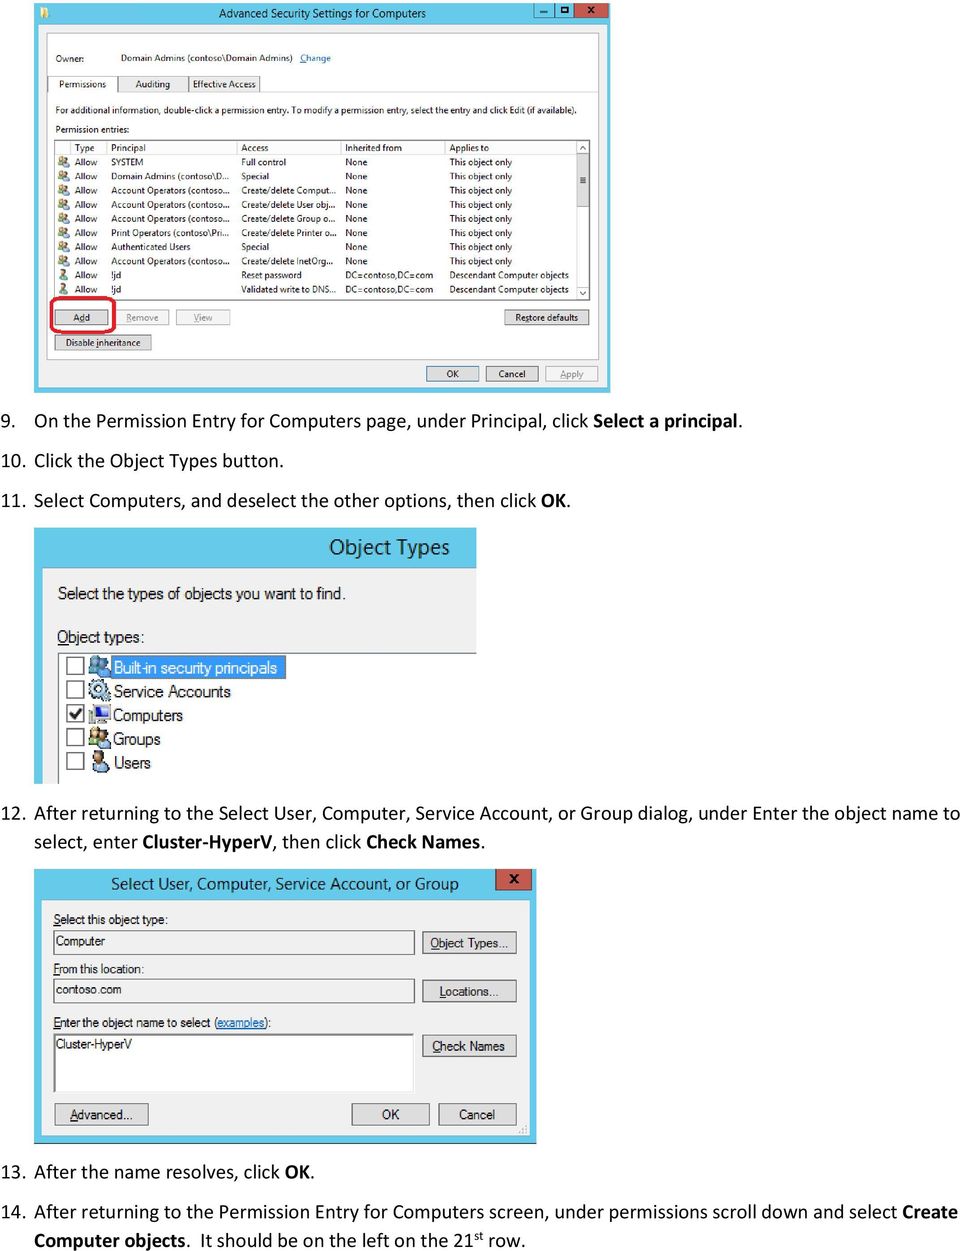 After returning to the Select User, Computer, Service Account, or Group dialog, under Enter the object name to select, enter Cluster-HyperV,